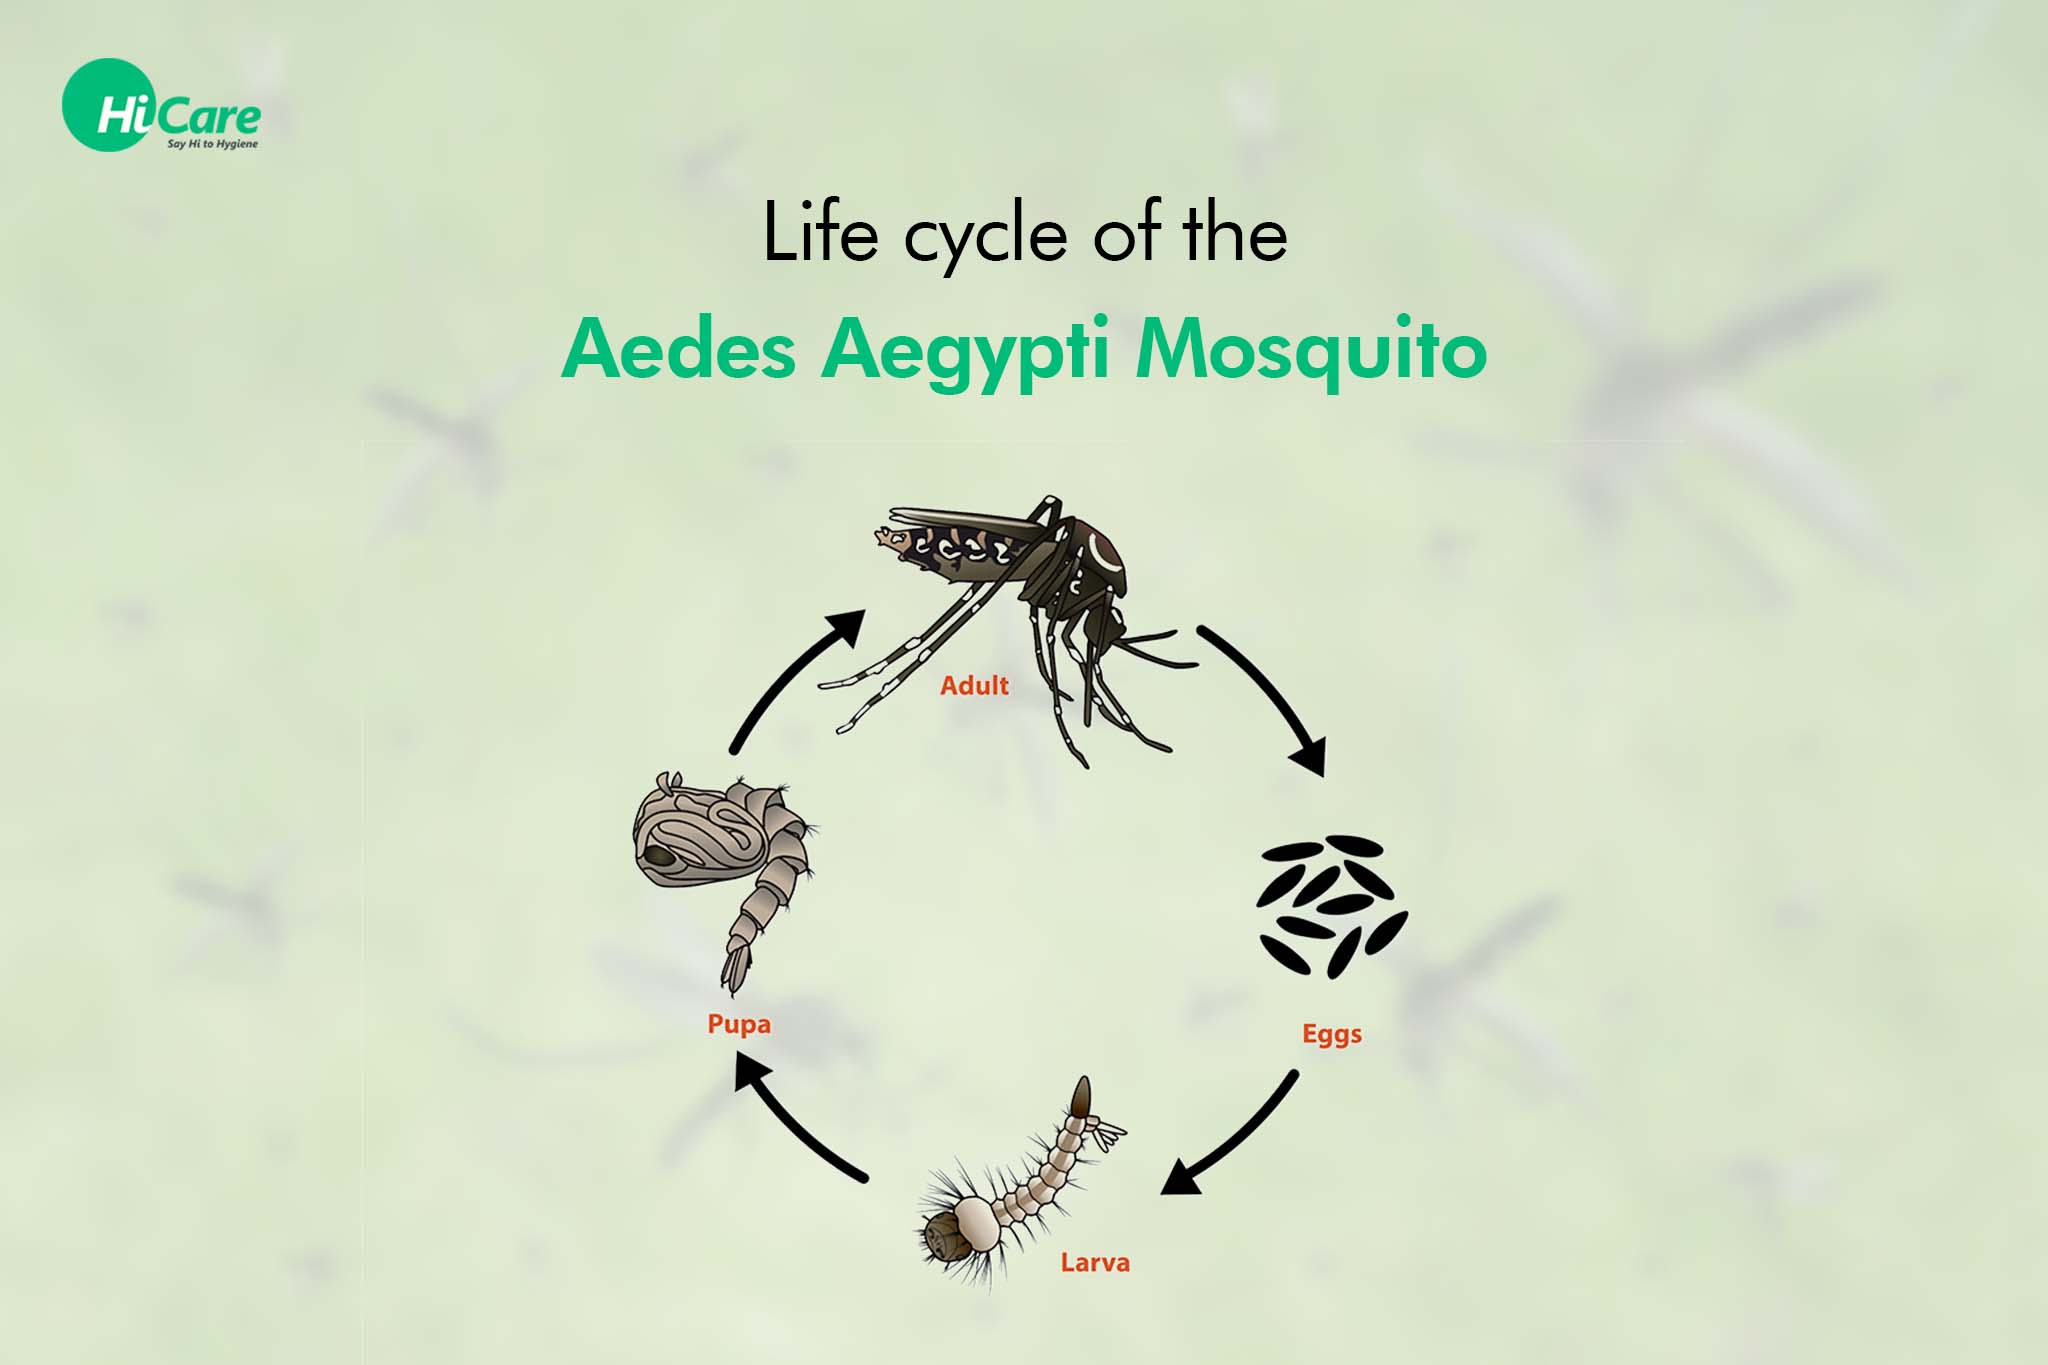 life cycle of the aedes aegypti mosquito